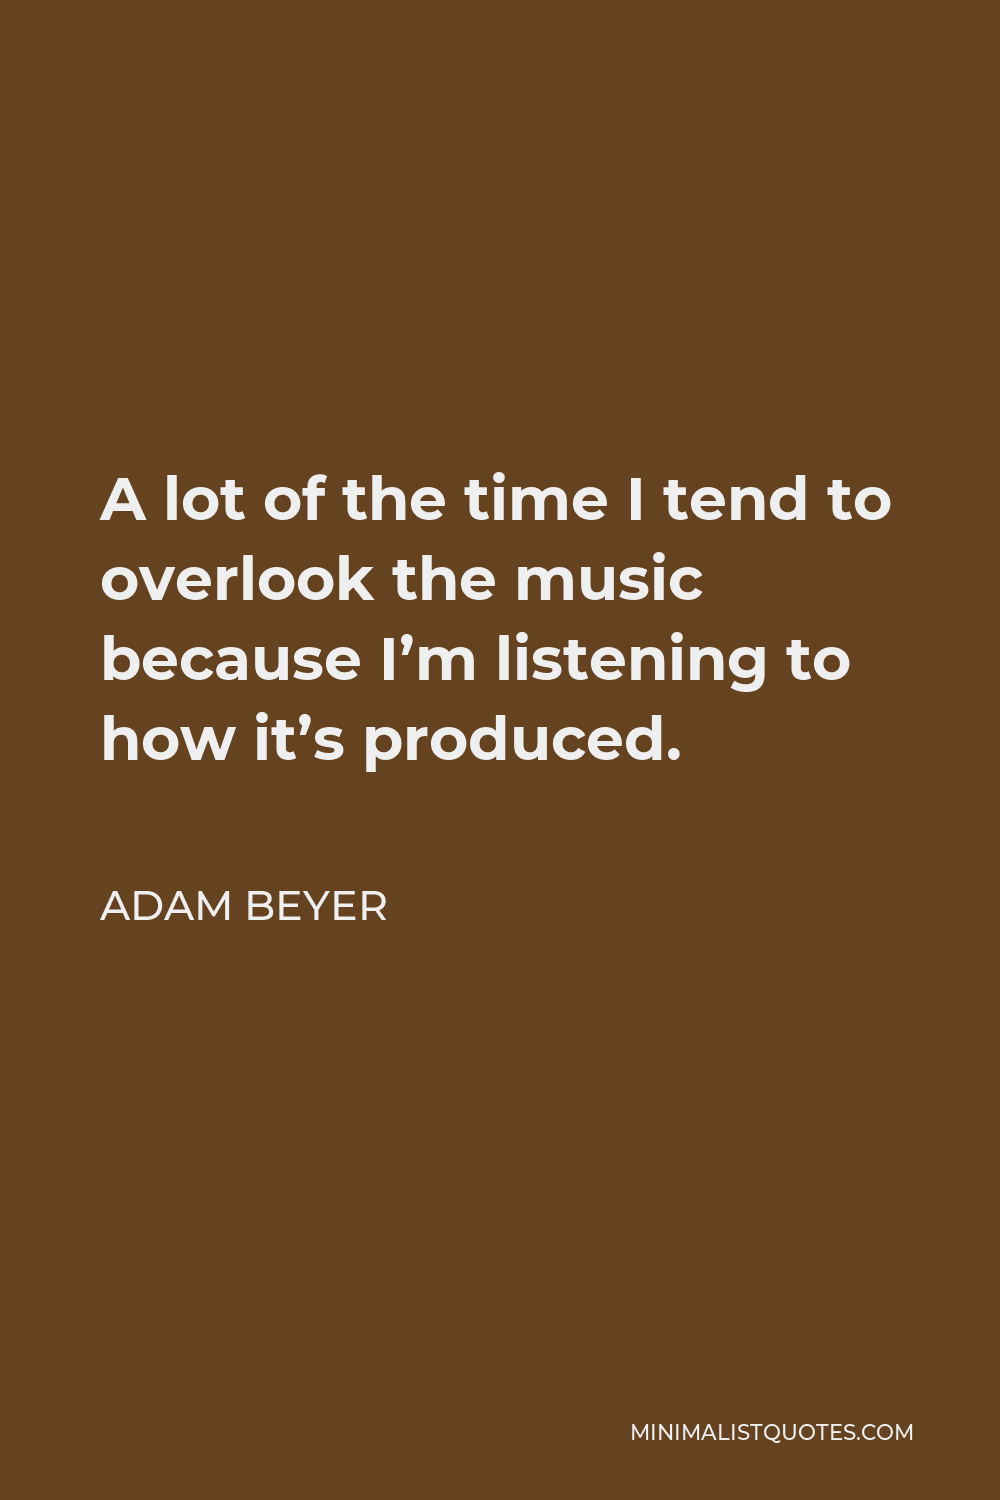 Adam Beyer Quote - A lot of the time I tend to overlook the music because I’m listening to how it’s produced.